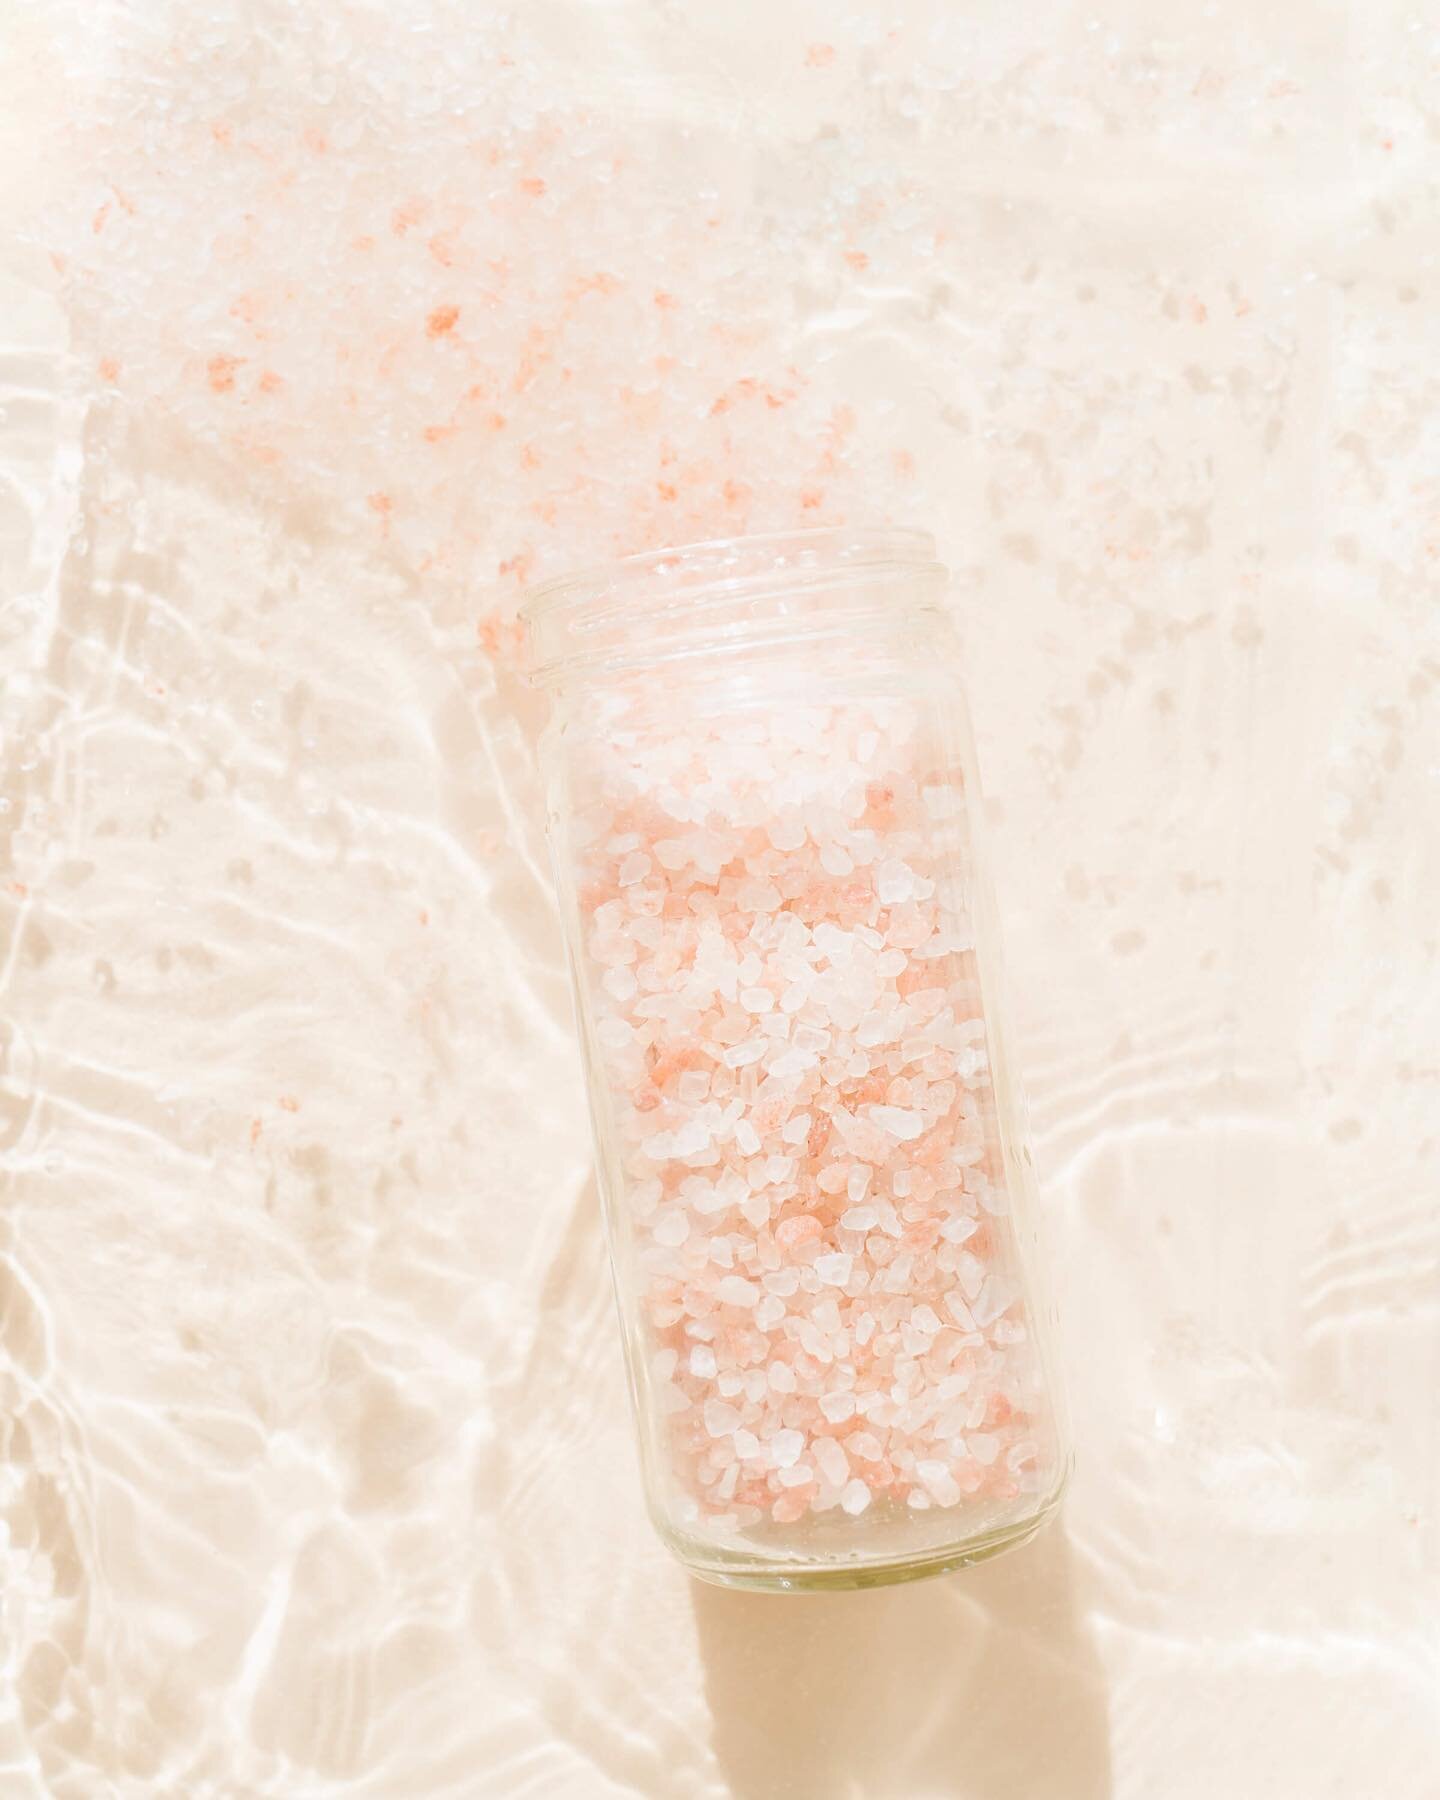 One of the most well-known benefits of a Himalayan salt bath is its ability to provide a relaxing and calming experience. Adding these to your bath not only simulates the calming effect of lying on a warm saltwater beach but it is also said to ease p